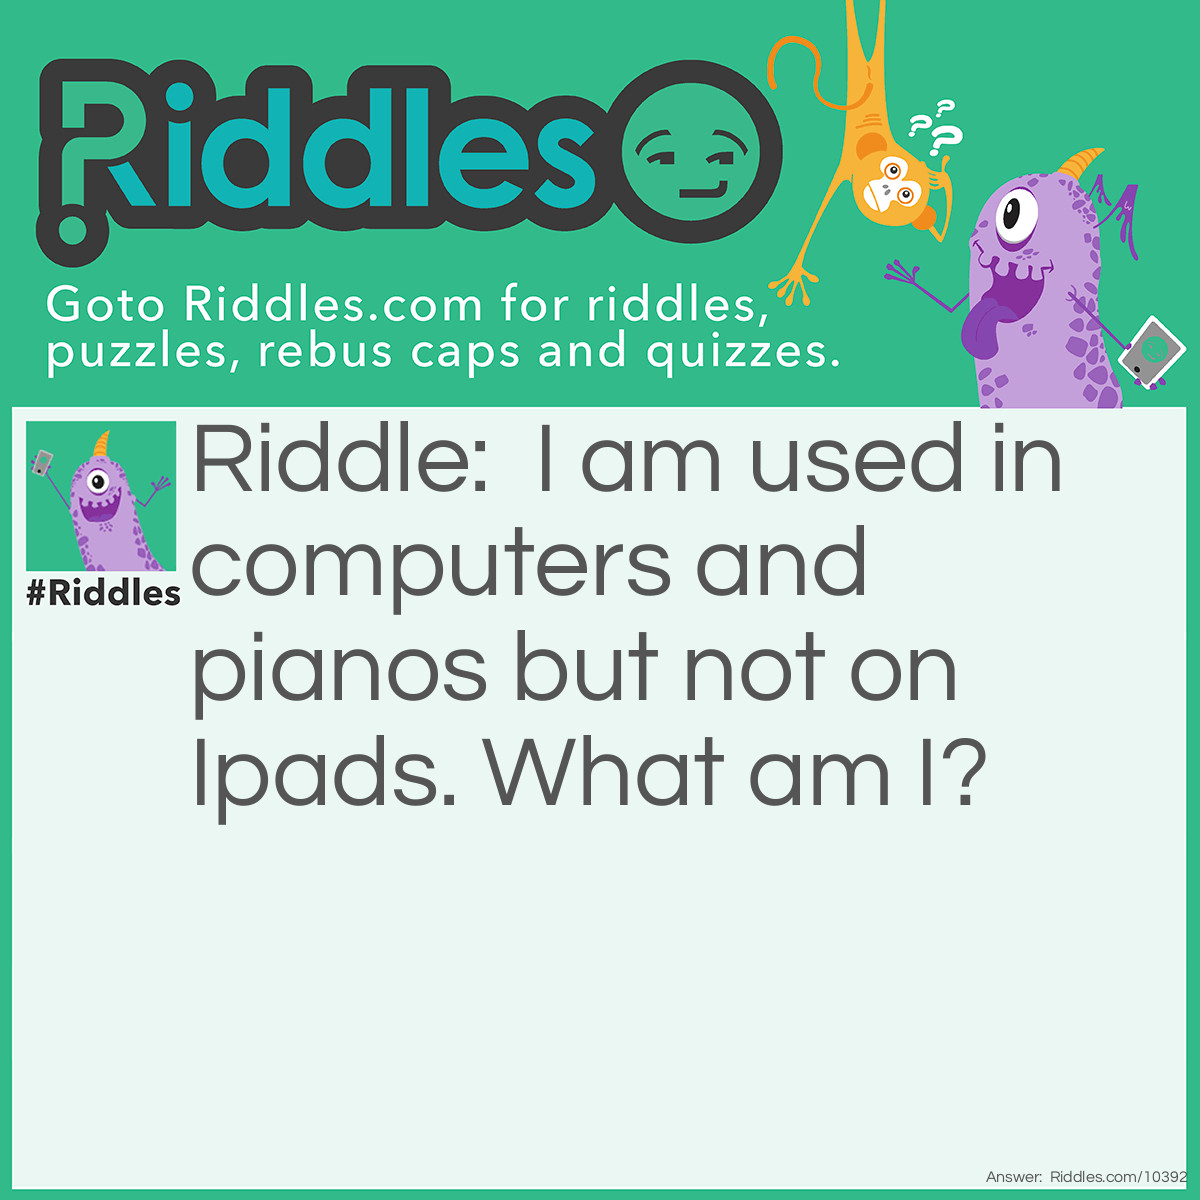 Riddle: I am used in computers and pianos but not on Ipads. What am I? Answer: A keyboard!